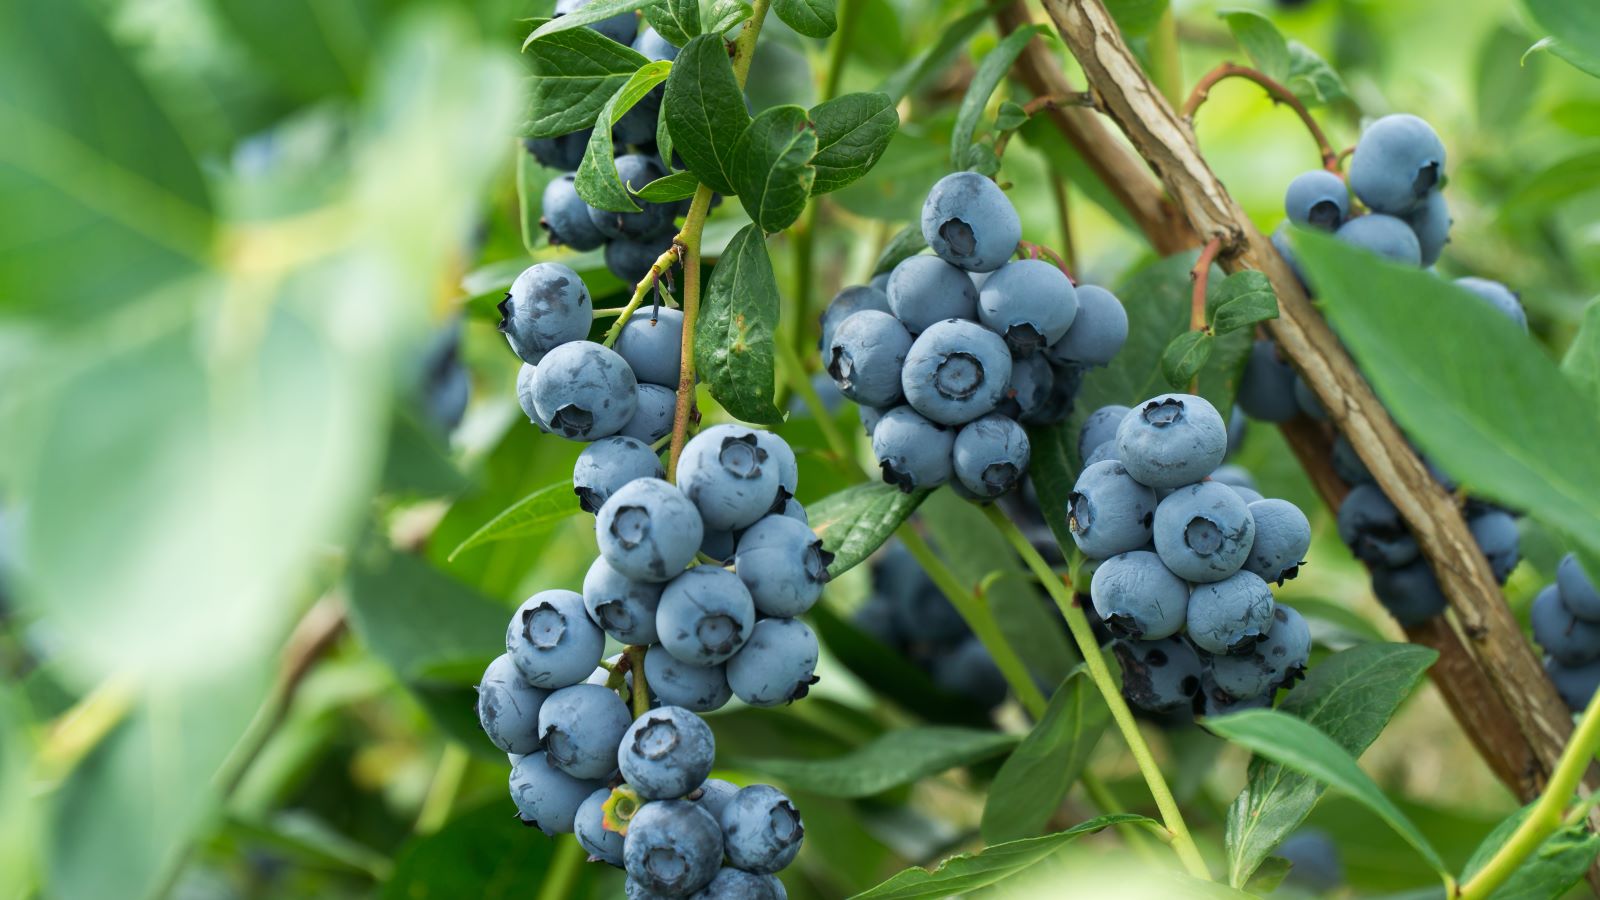 6 Reasons to Eat More Blueberries